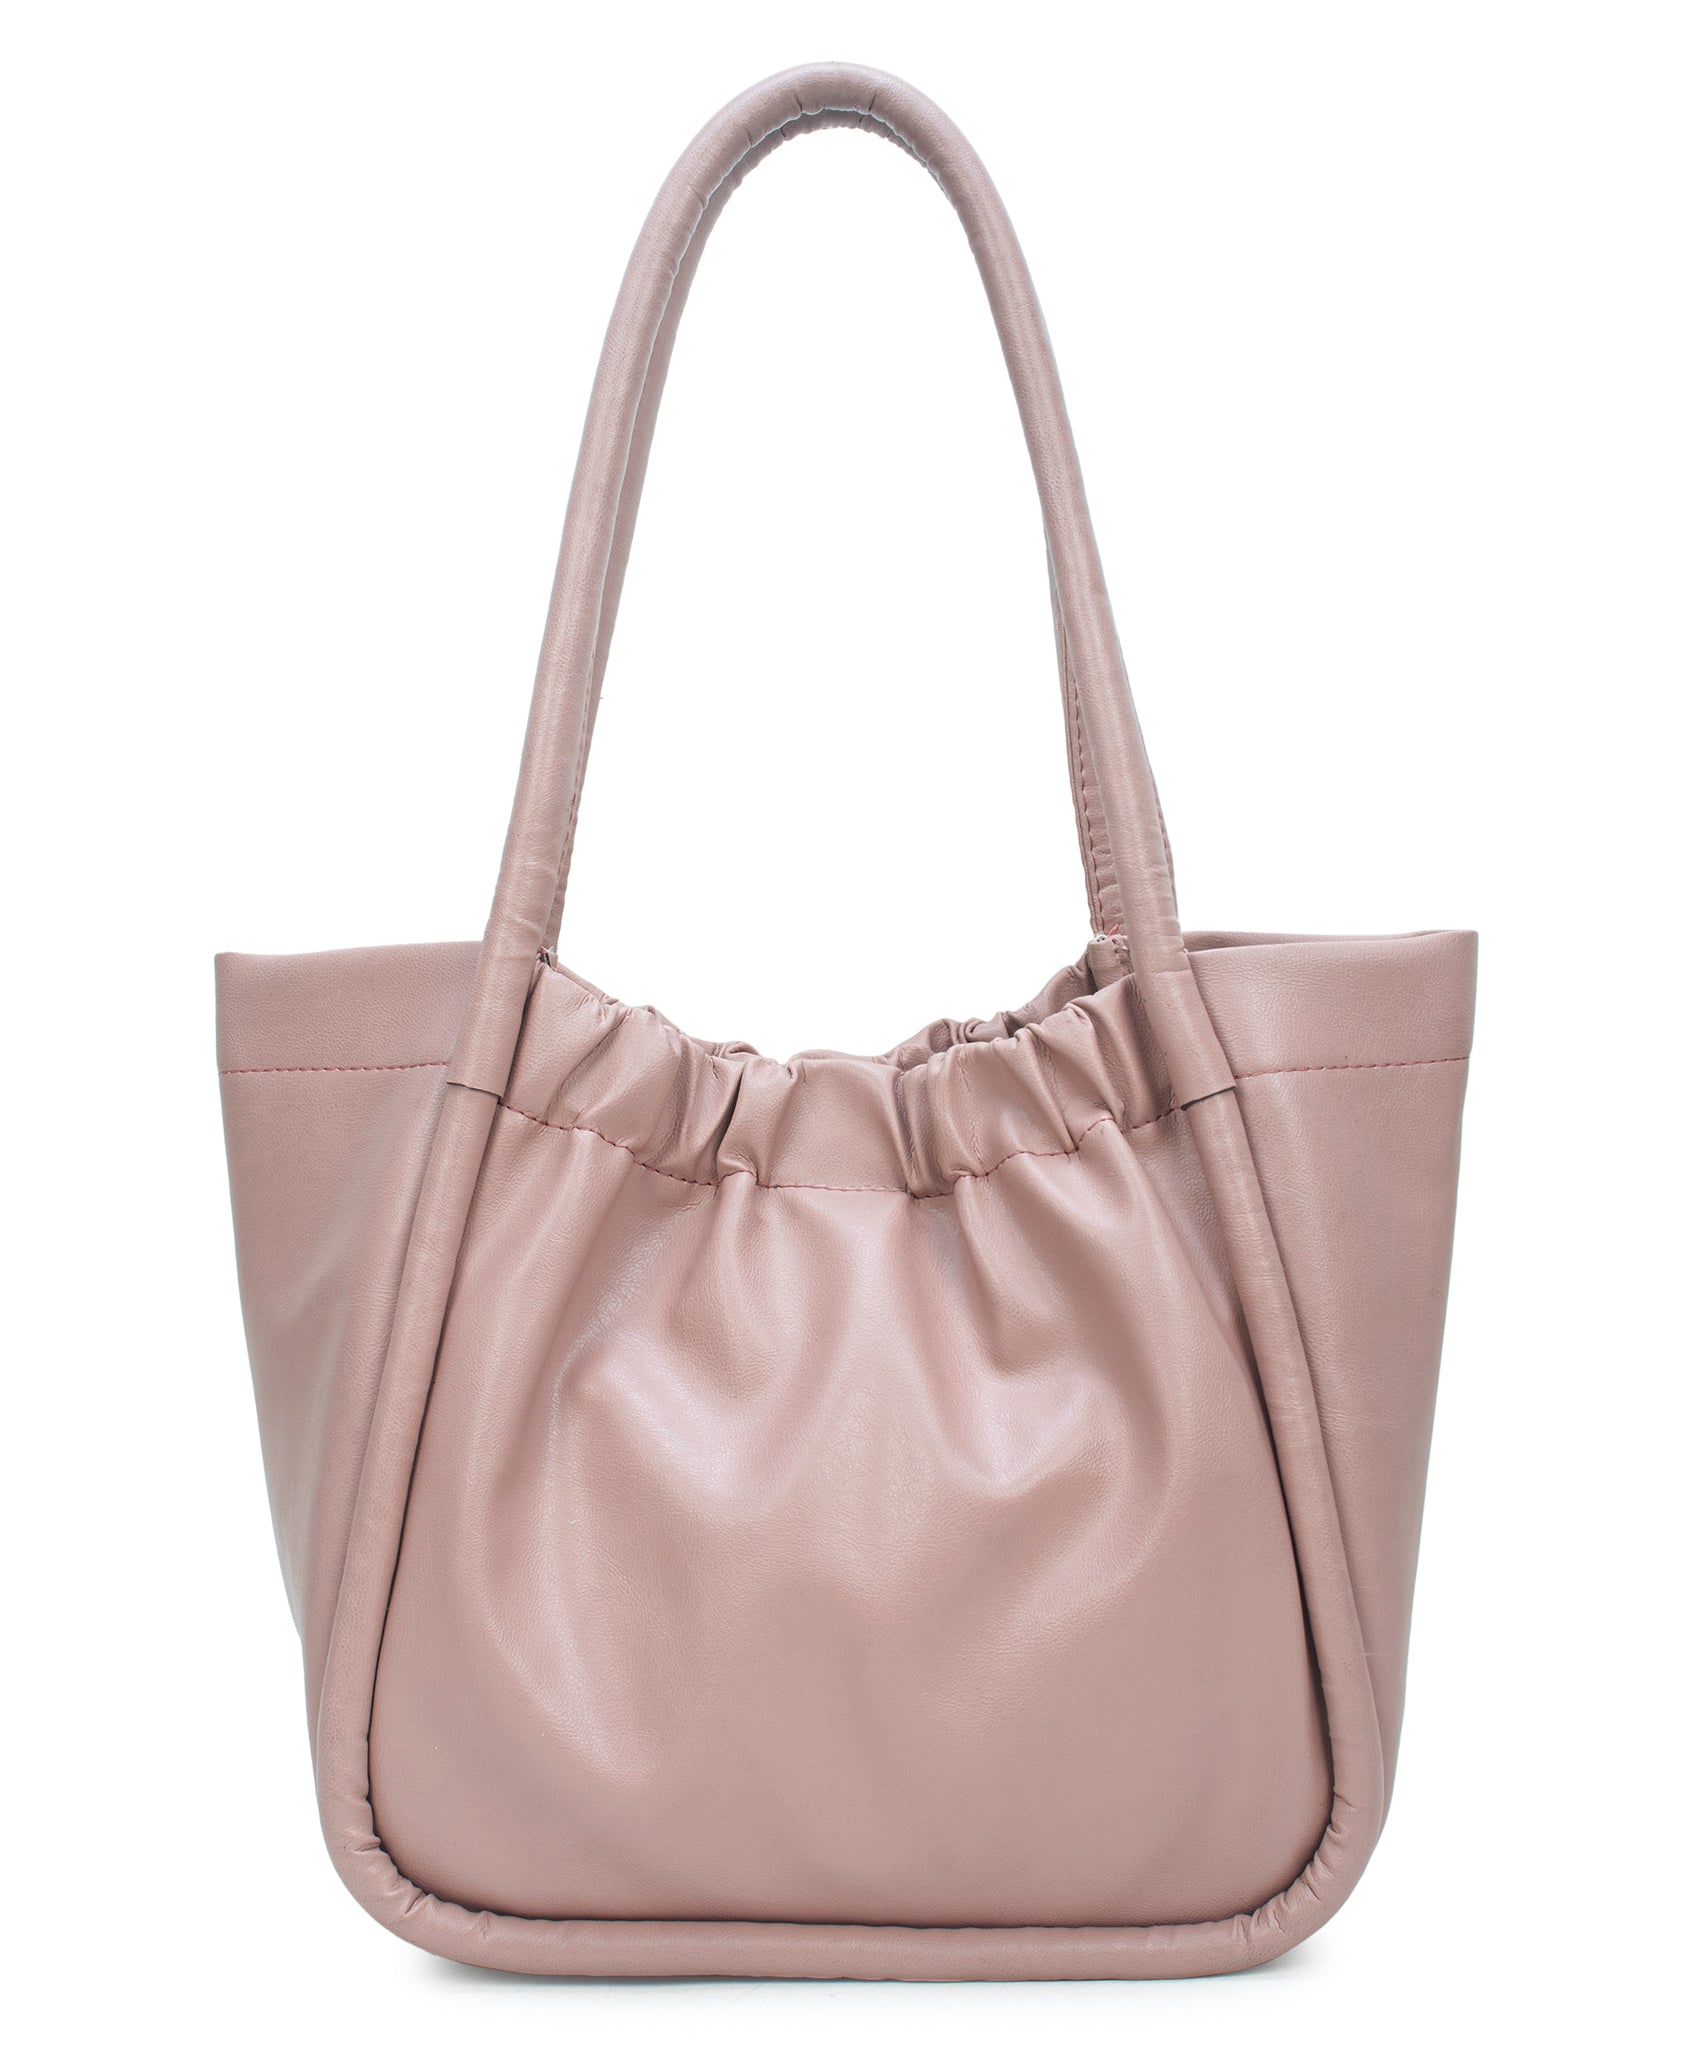 Women Pink Medium Solid Shoulder Bag with Pouch